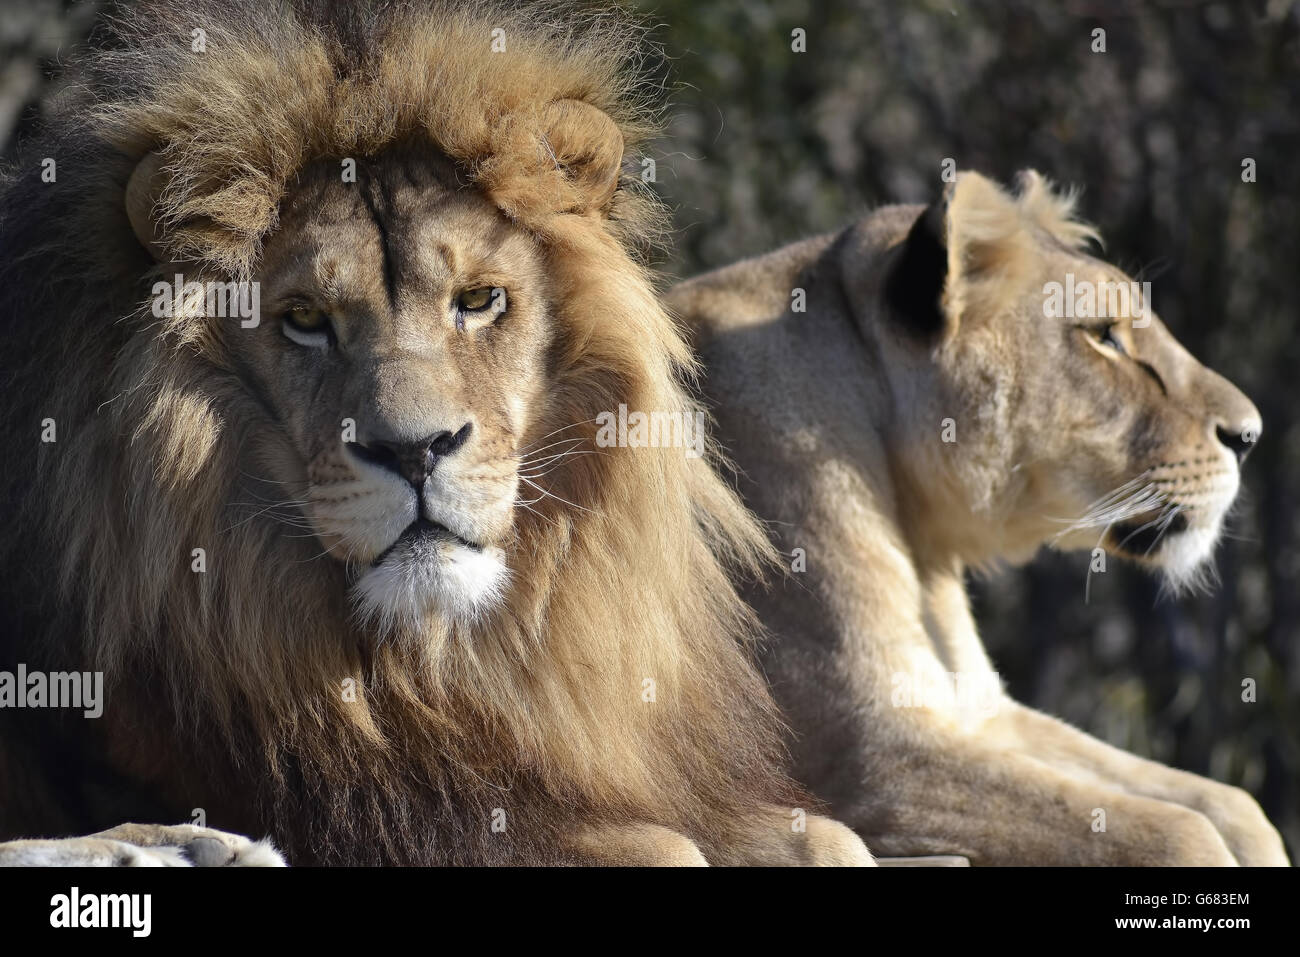 A lion (Panthera leo) with a tear, and a lioness in the Drakenstein Lion Park, Western Cape, South Africa Stock Photo